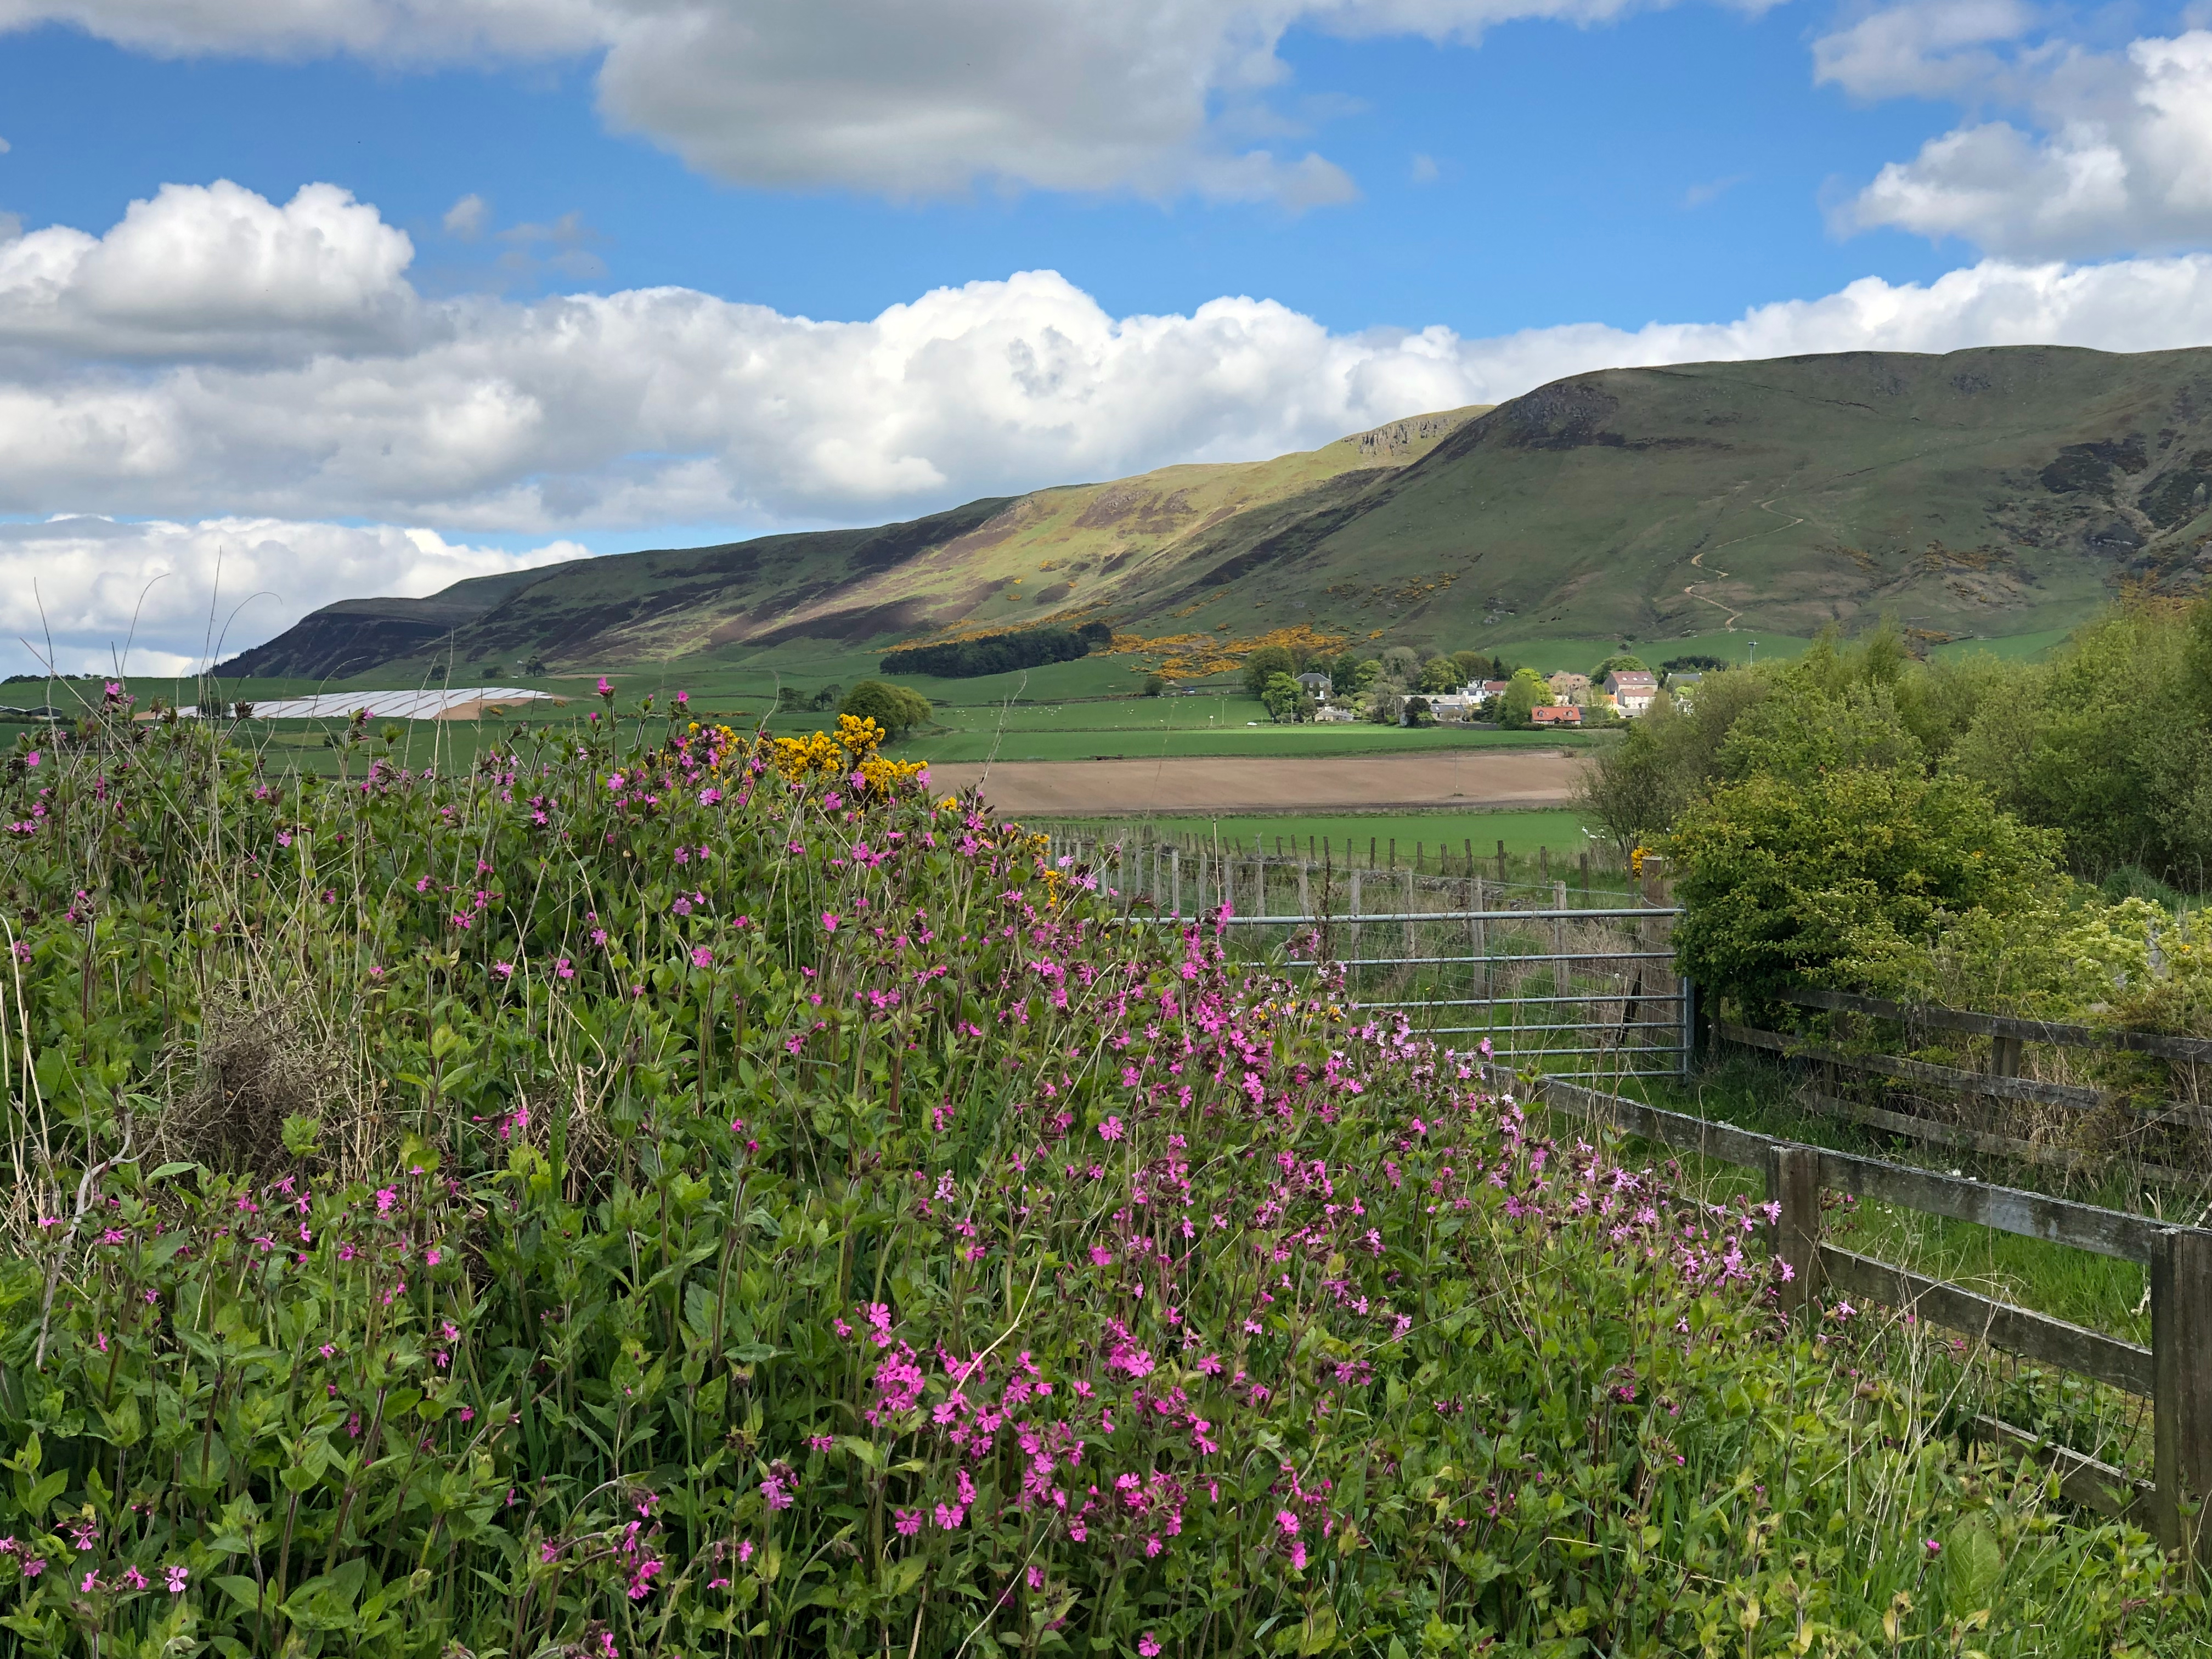 View of Scottish Hills with pink flowers in the foreground, highland hills in the background, and blue sky with fluffy white clouds